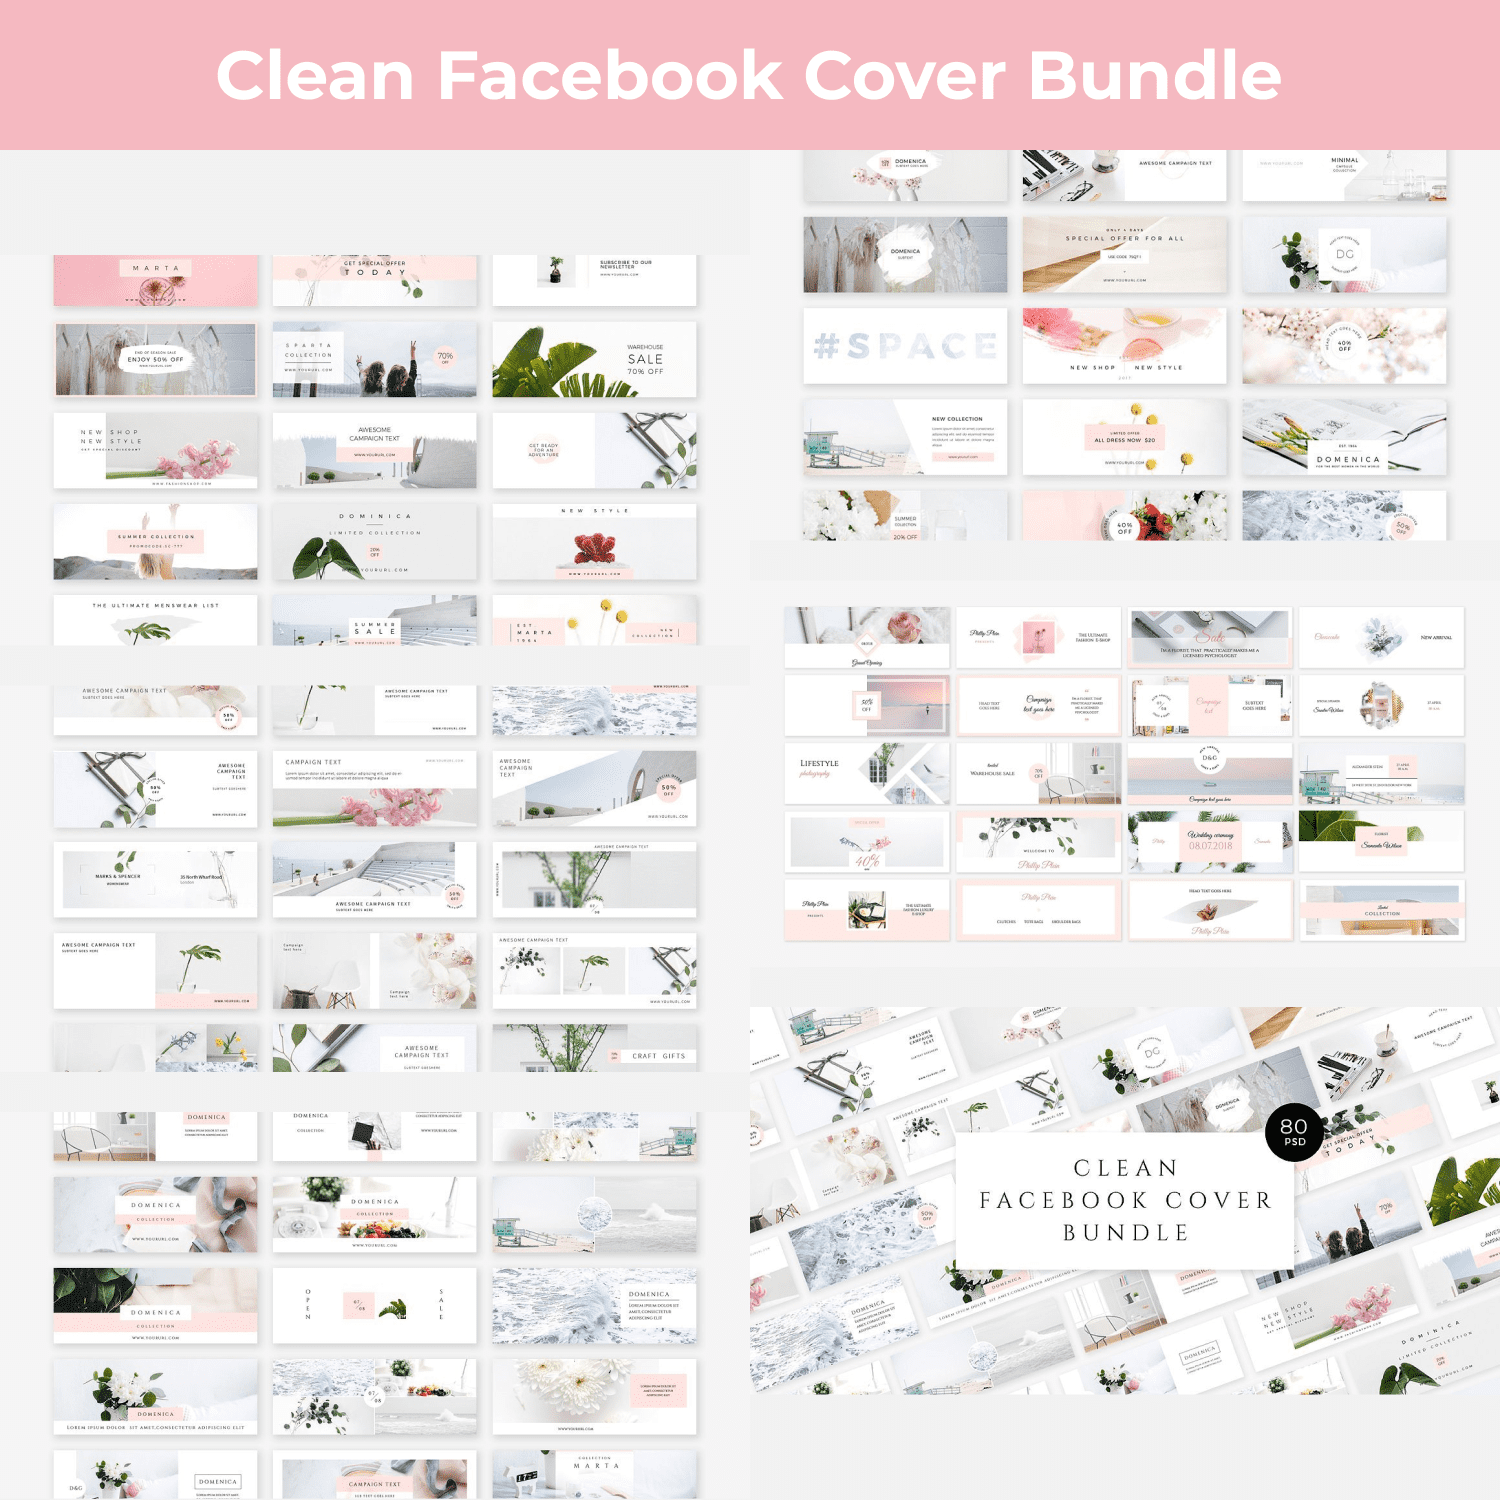 Clean Facebook Cover Bundle cover image.